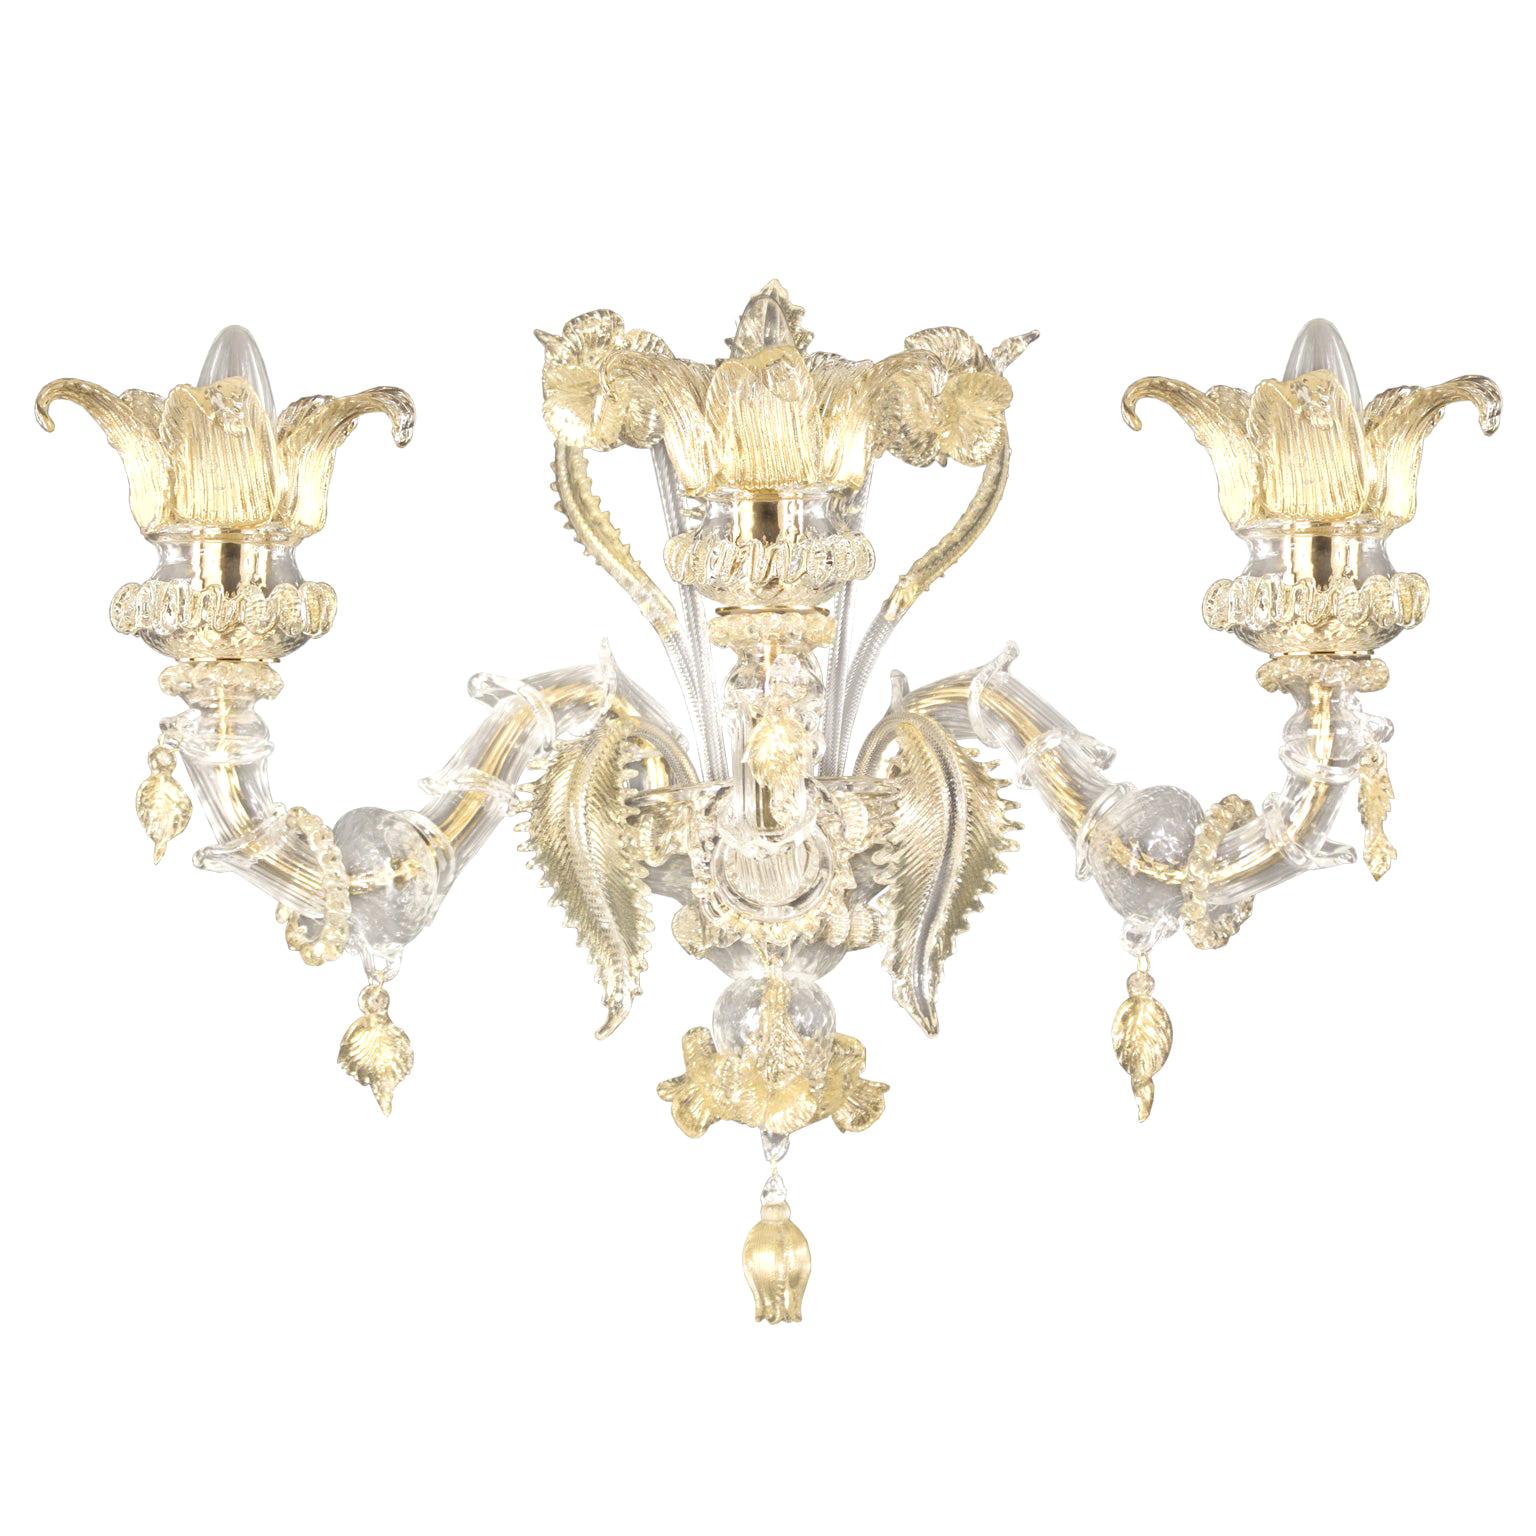 Rezzonico Wall 3 arms Crystal and Gold Murano Glass Regale by Multiforme